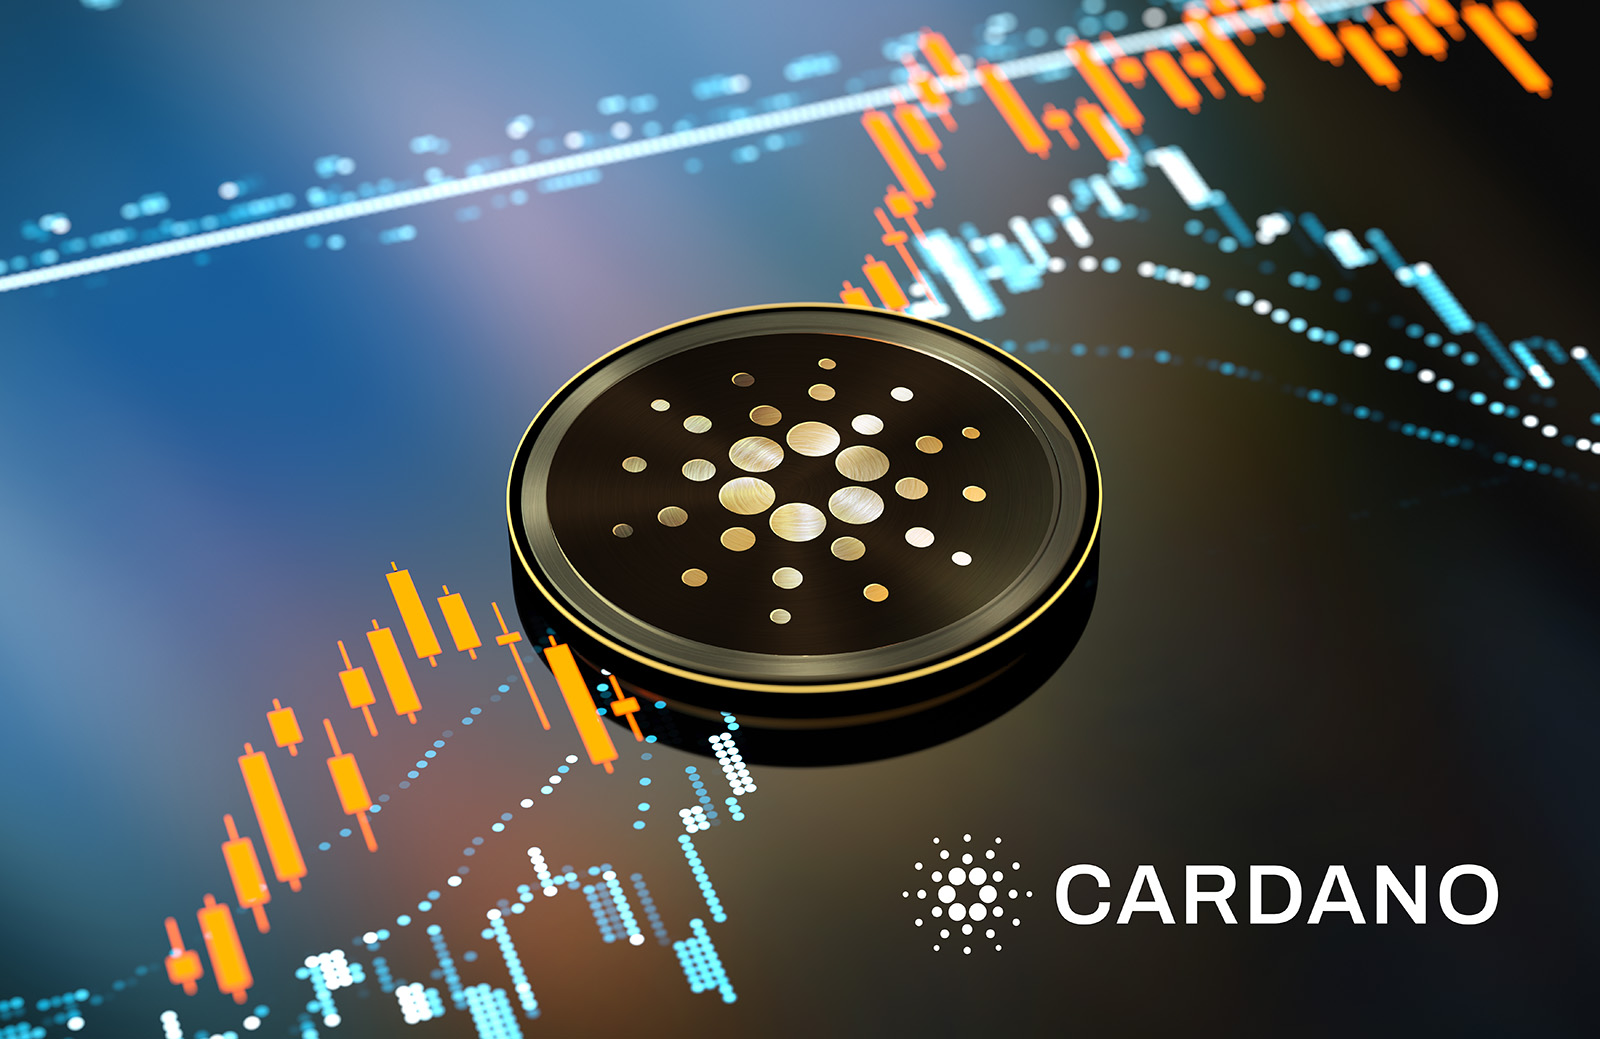 Cardano (ADA) price down by 5% in 7 days. Here's why